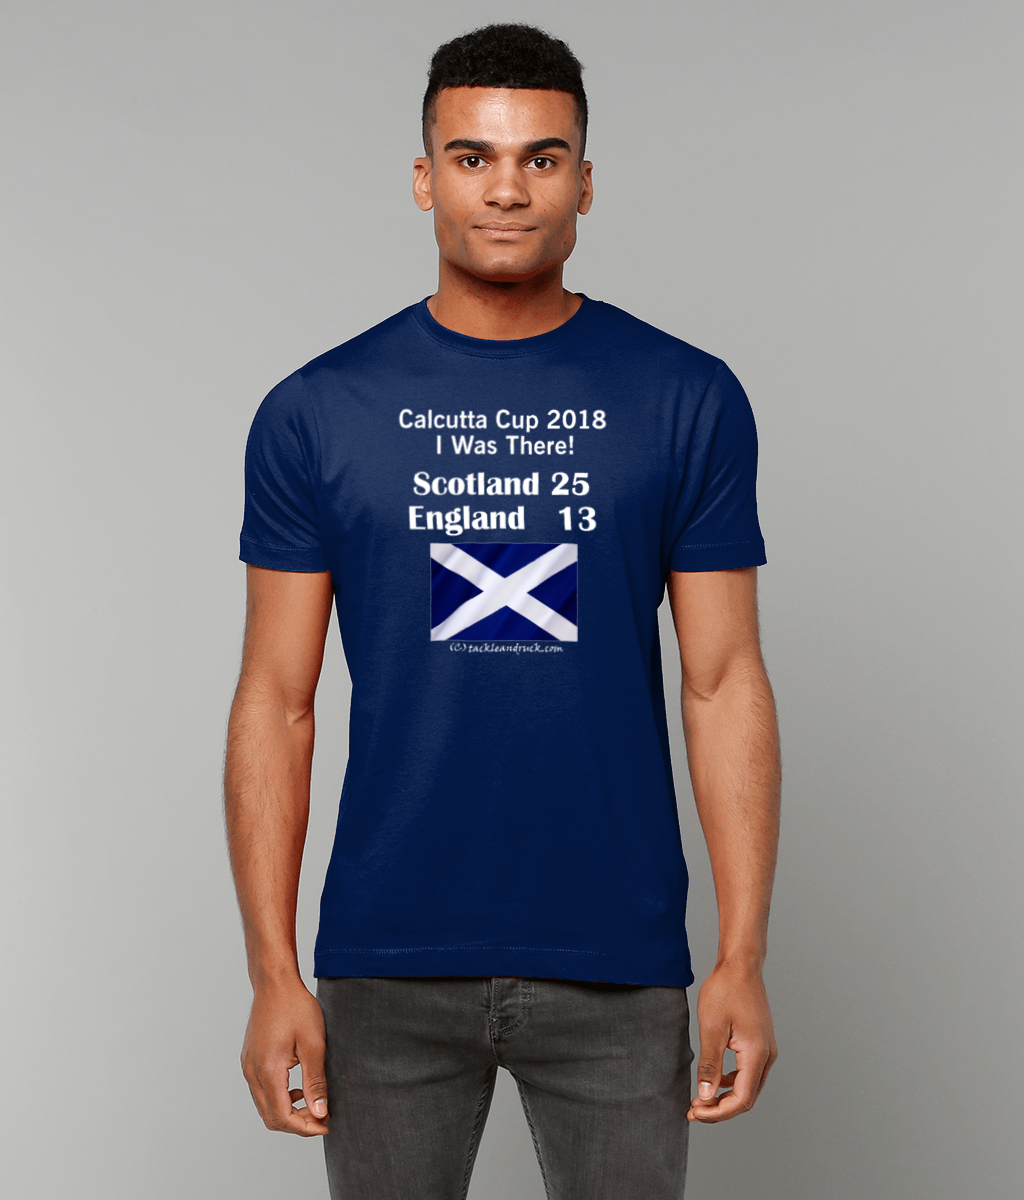 Men's T-Shirt - Calcutta Cup 2018 - I Was There!